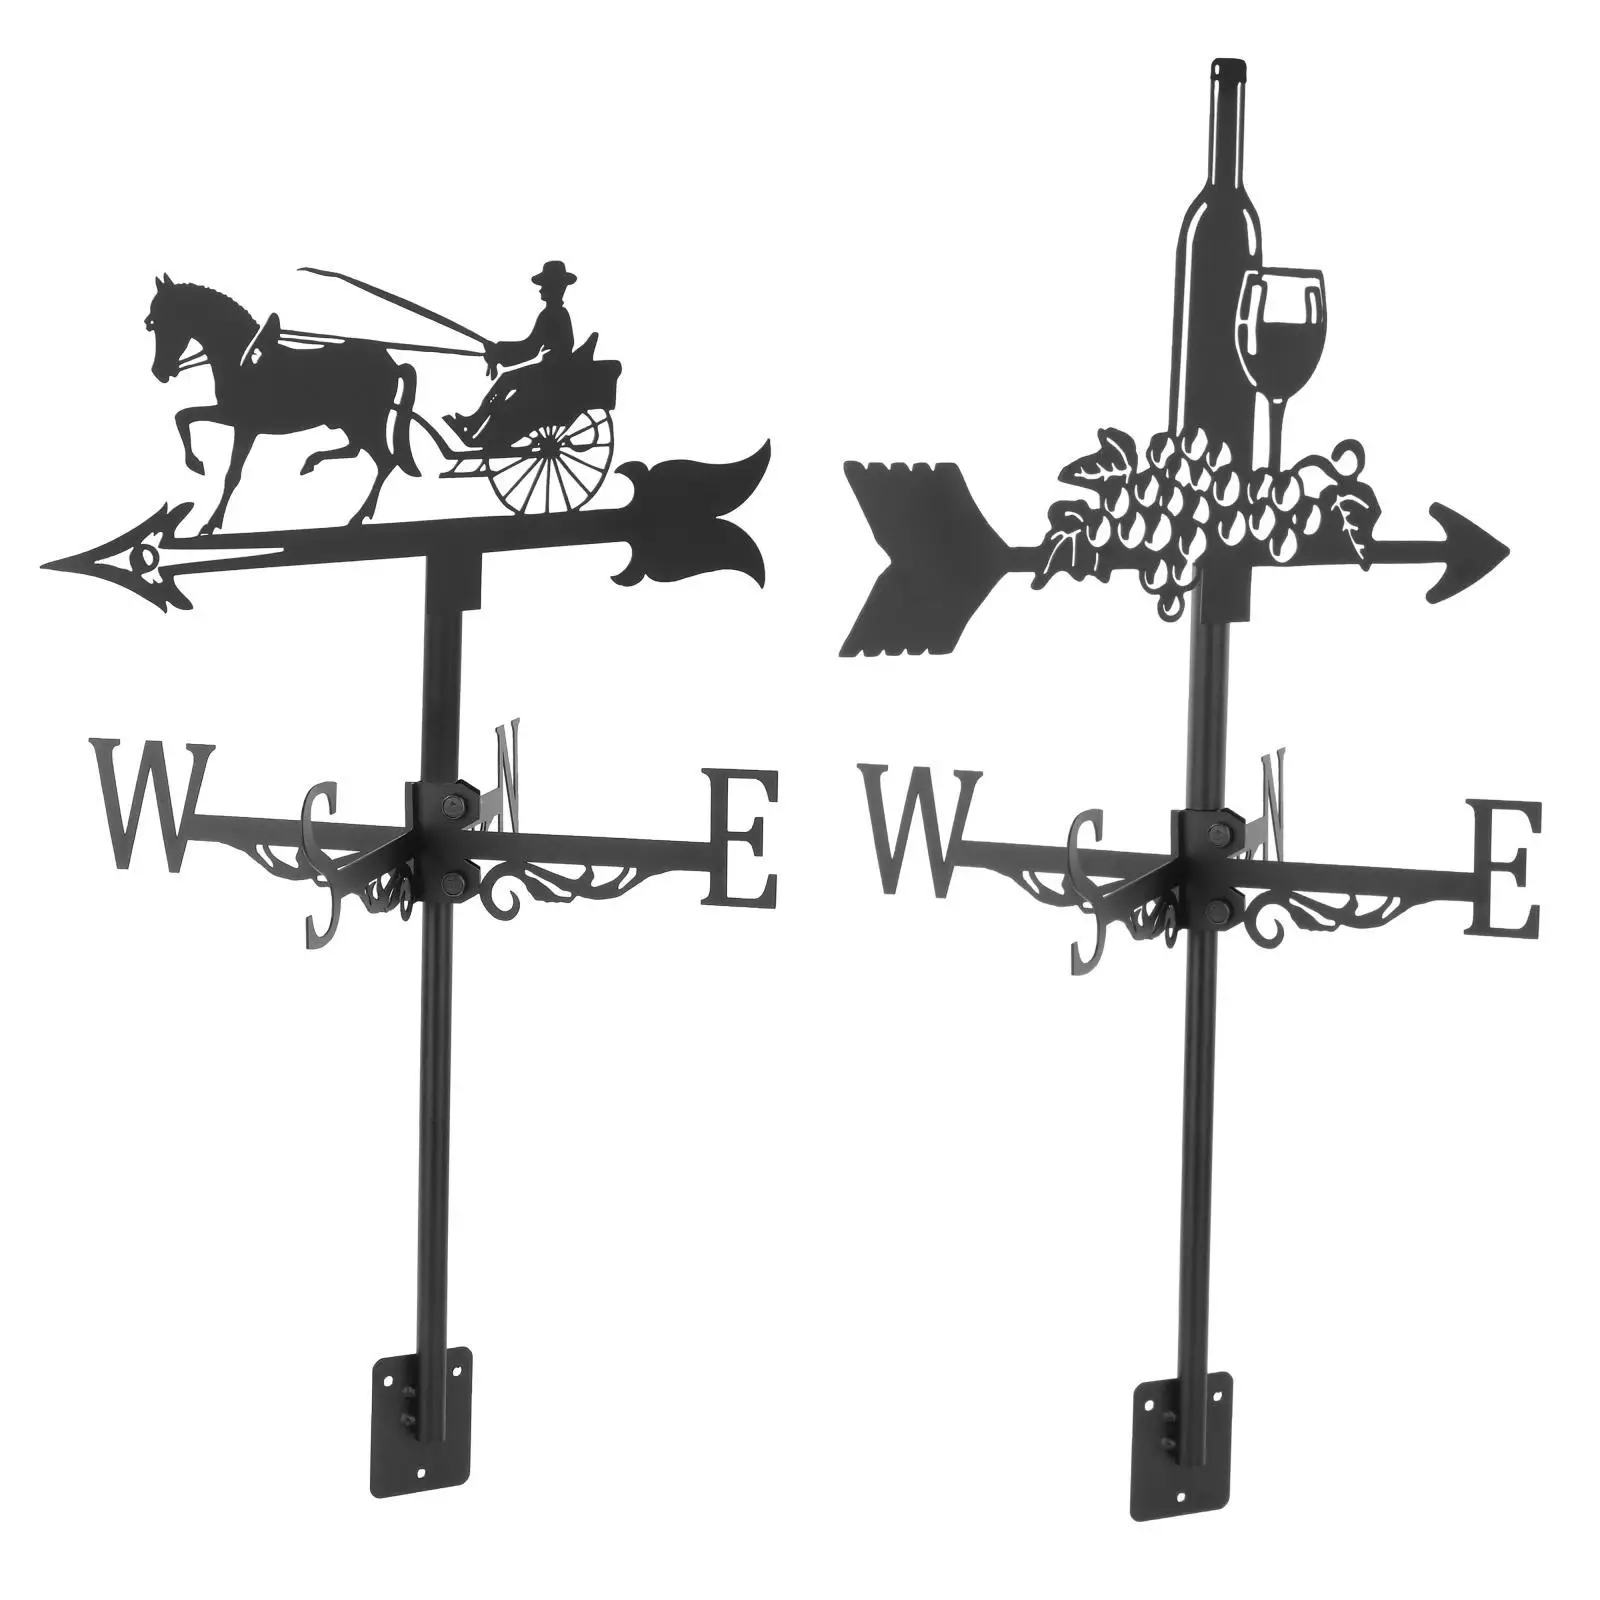 Weather Vane Garden Stake Farm Scene Weathercock for Fence Ornaments Crafts